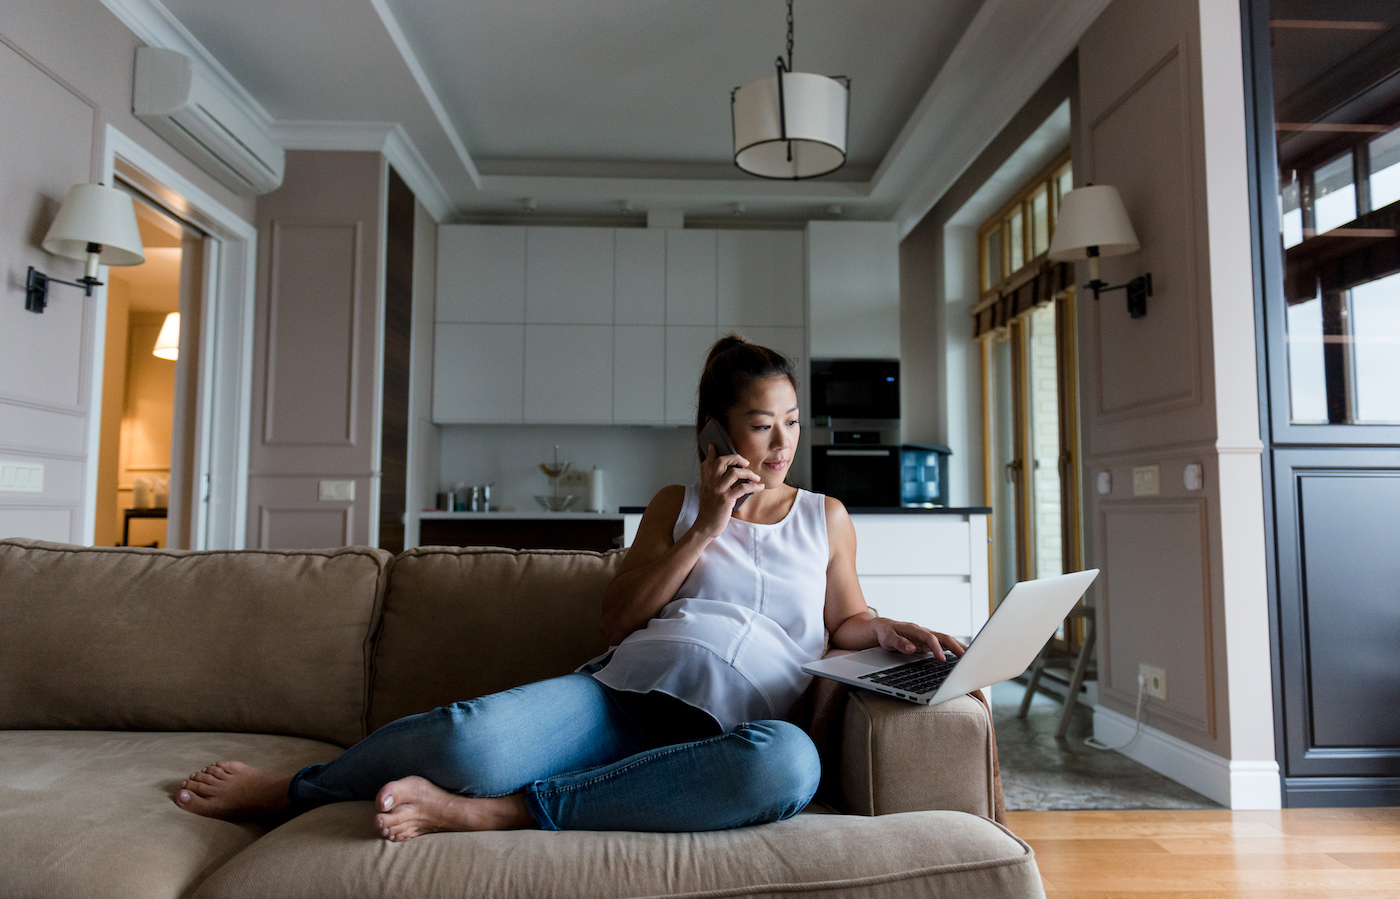 Is working from home lonely? Tips to make it social | Well+Good